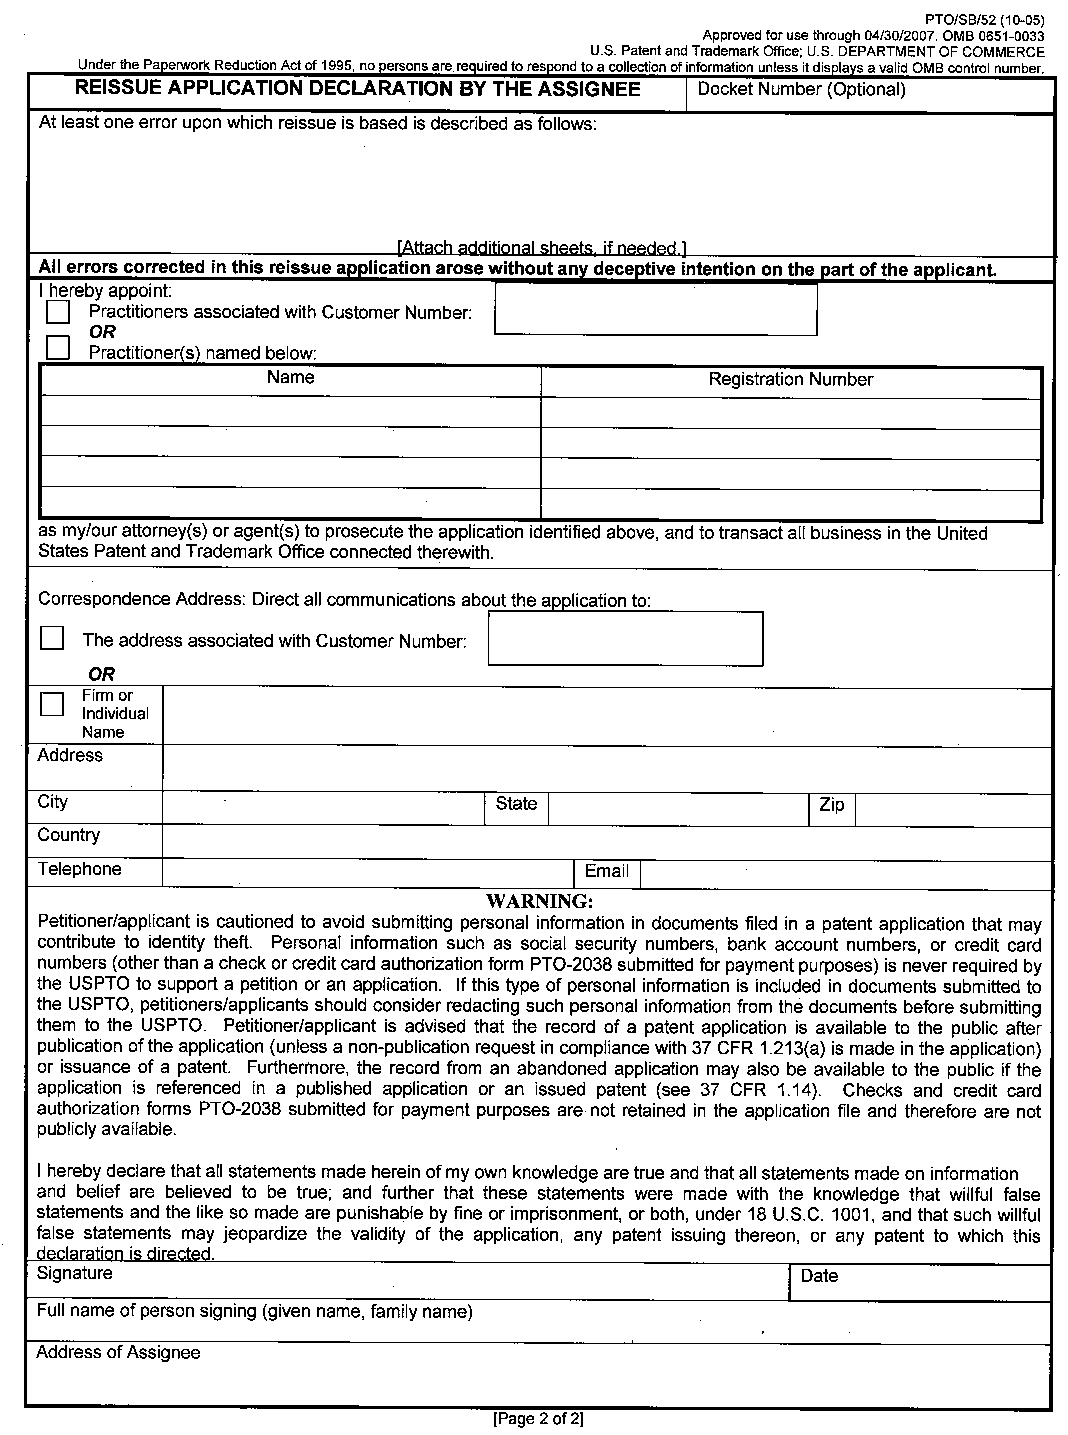 form pto/sb/52. page 2 of reissue application declaration by the assignee